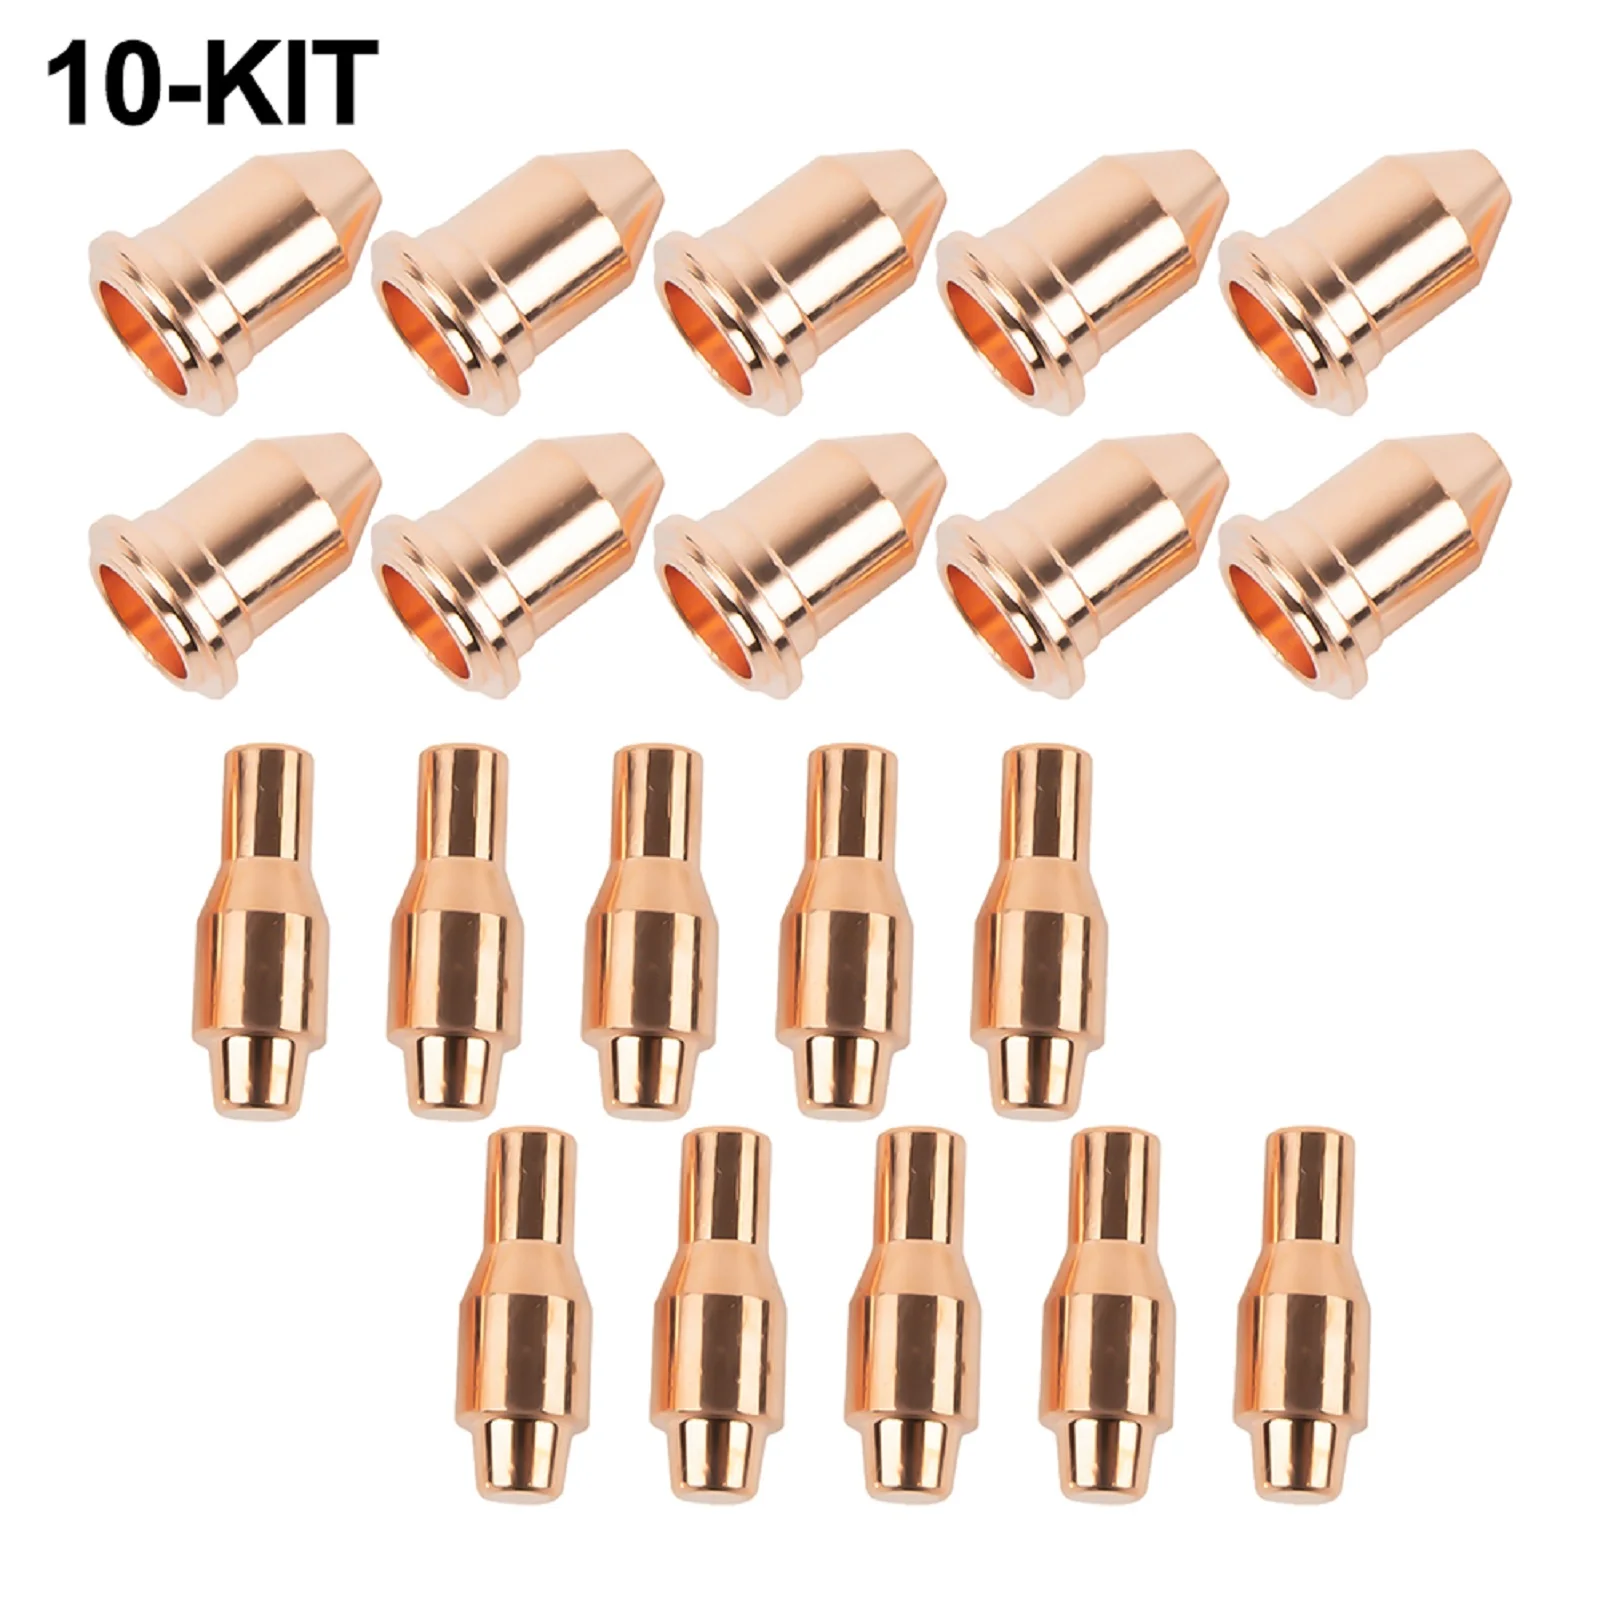 

20pcs Plasma 45 Torch Nozzle Electrodes 0.035'' 0.9mm For IPT-45 PT-45 56255 Cutting Torch Welding Soldering Welder Tool Parts